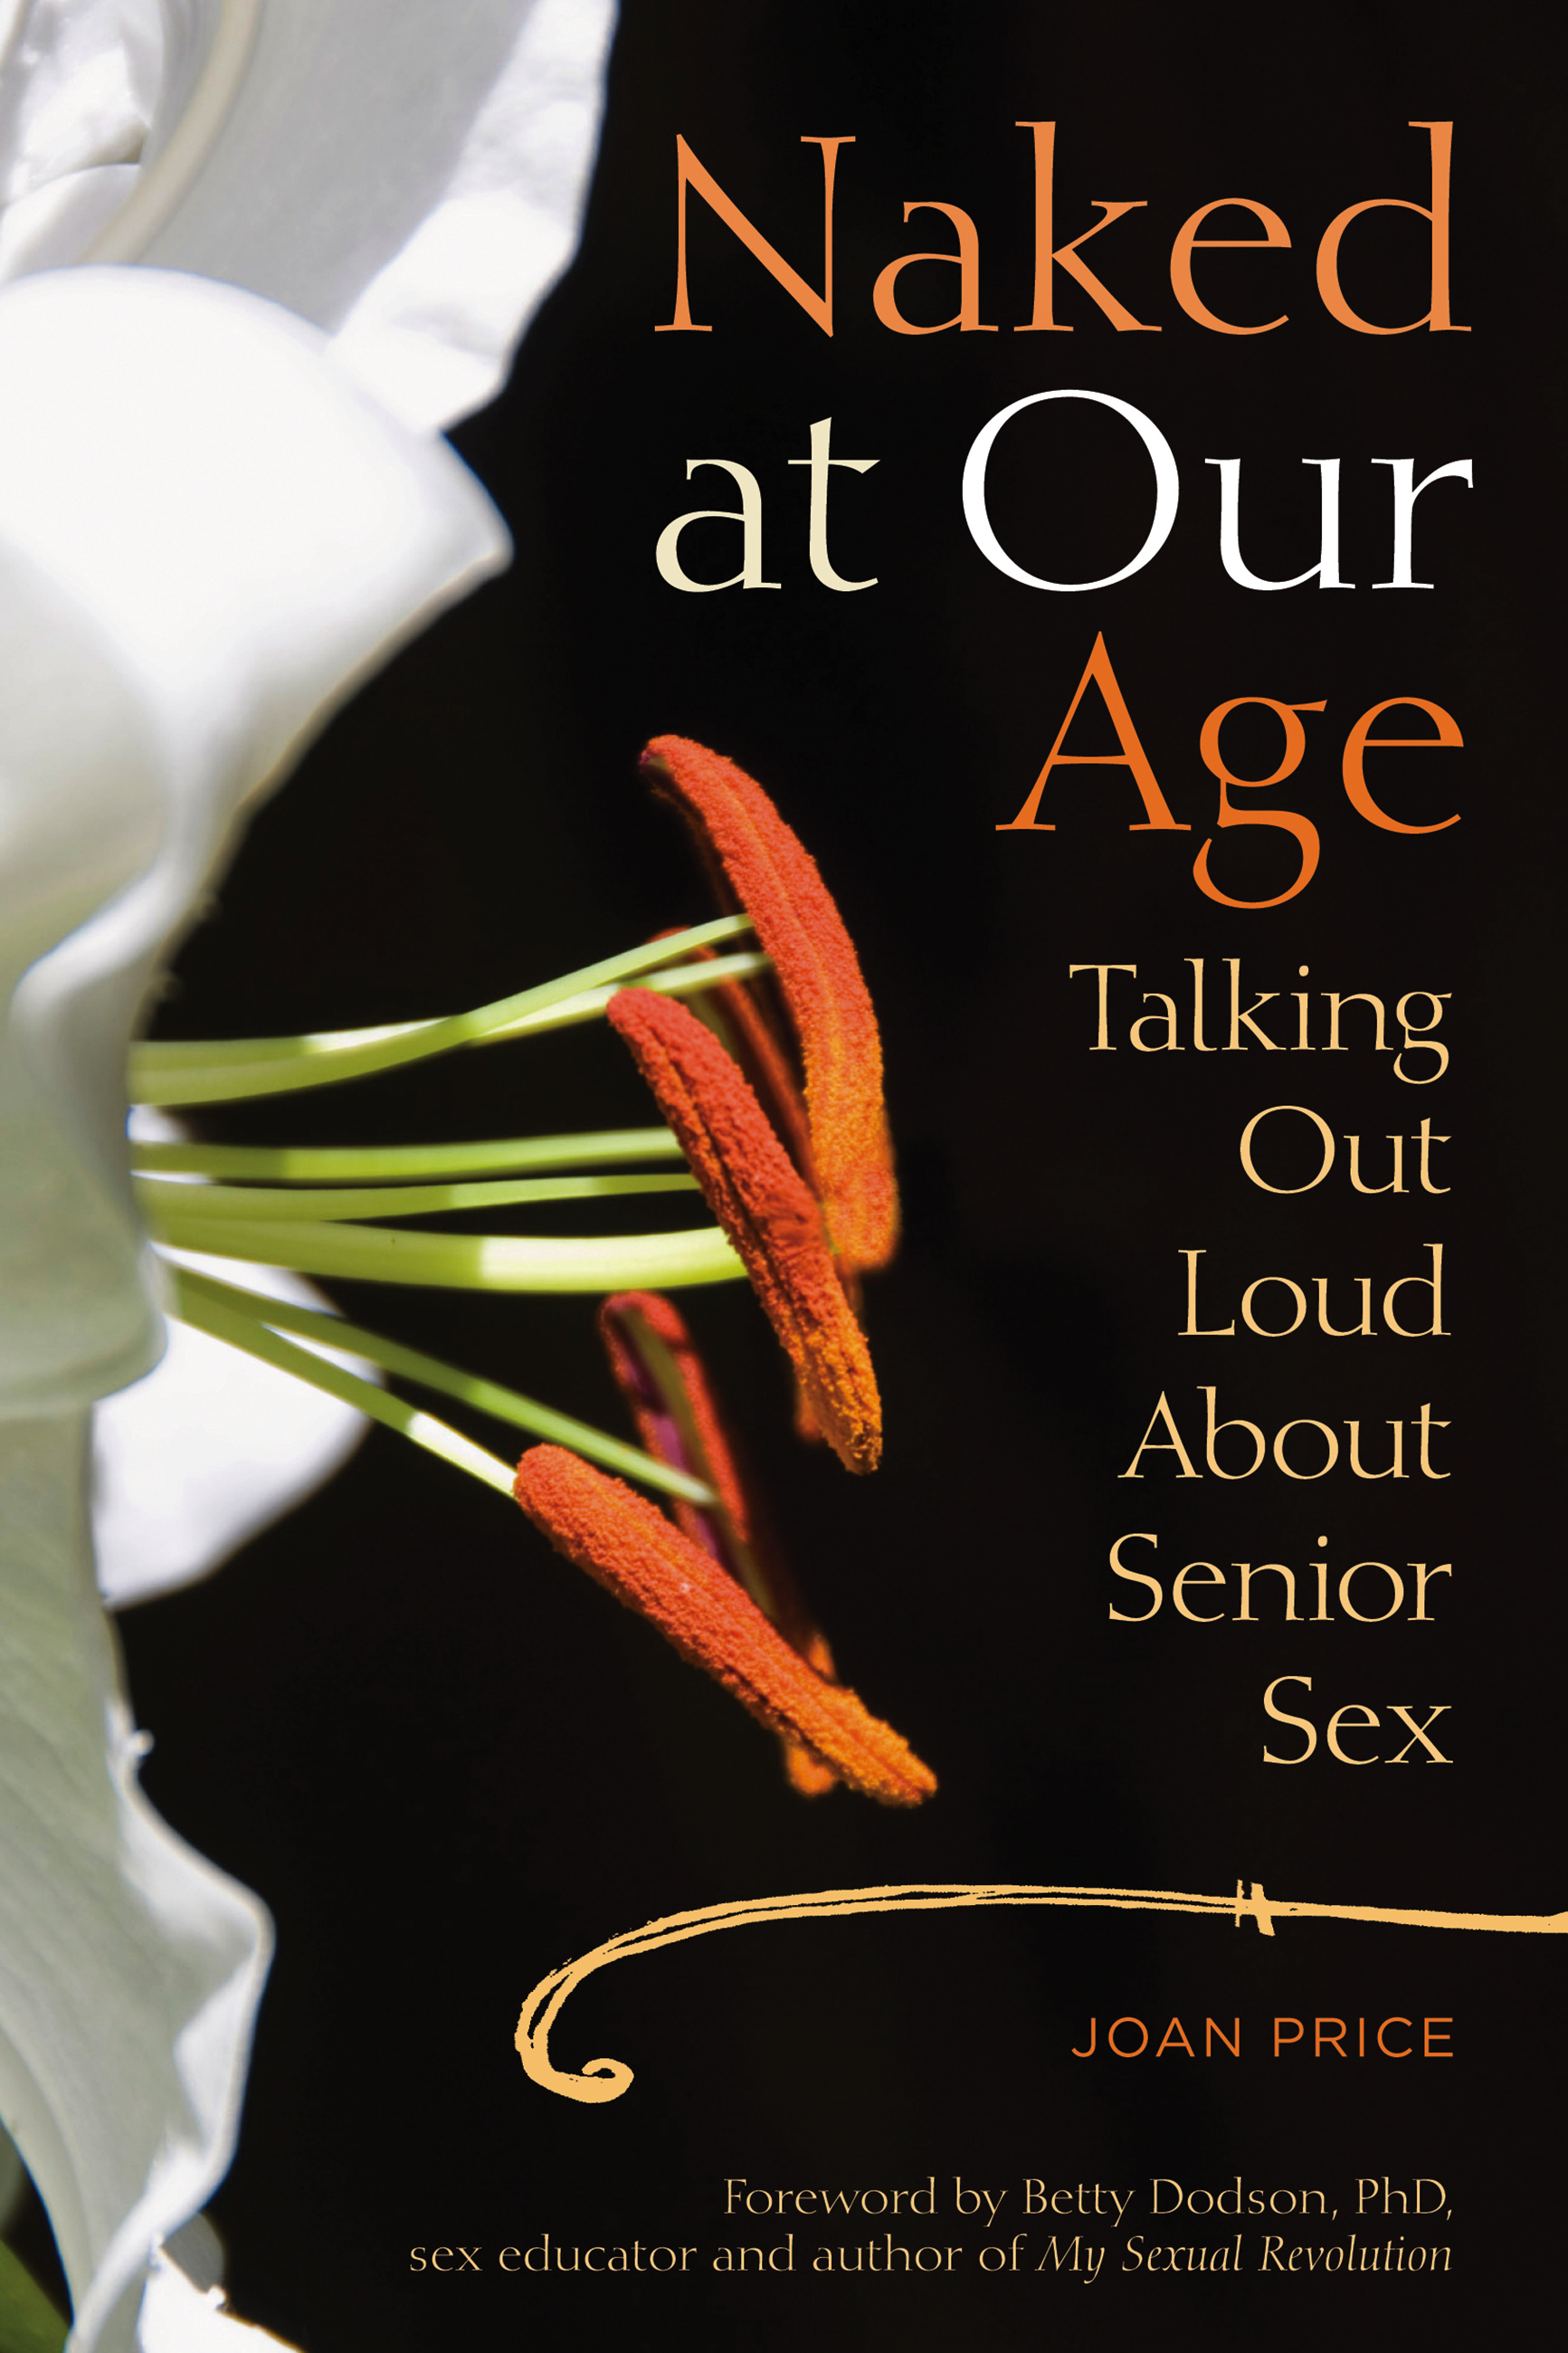 Naked at Our Age by Joan Price Hachette Book Group pic